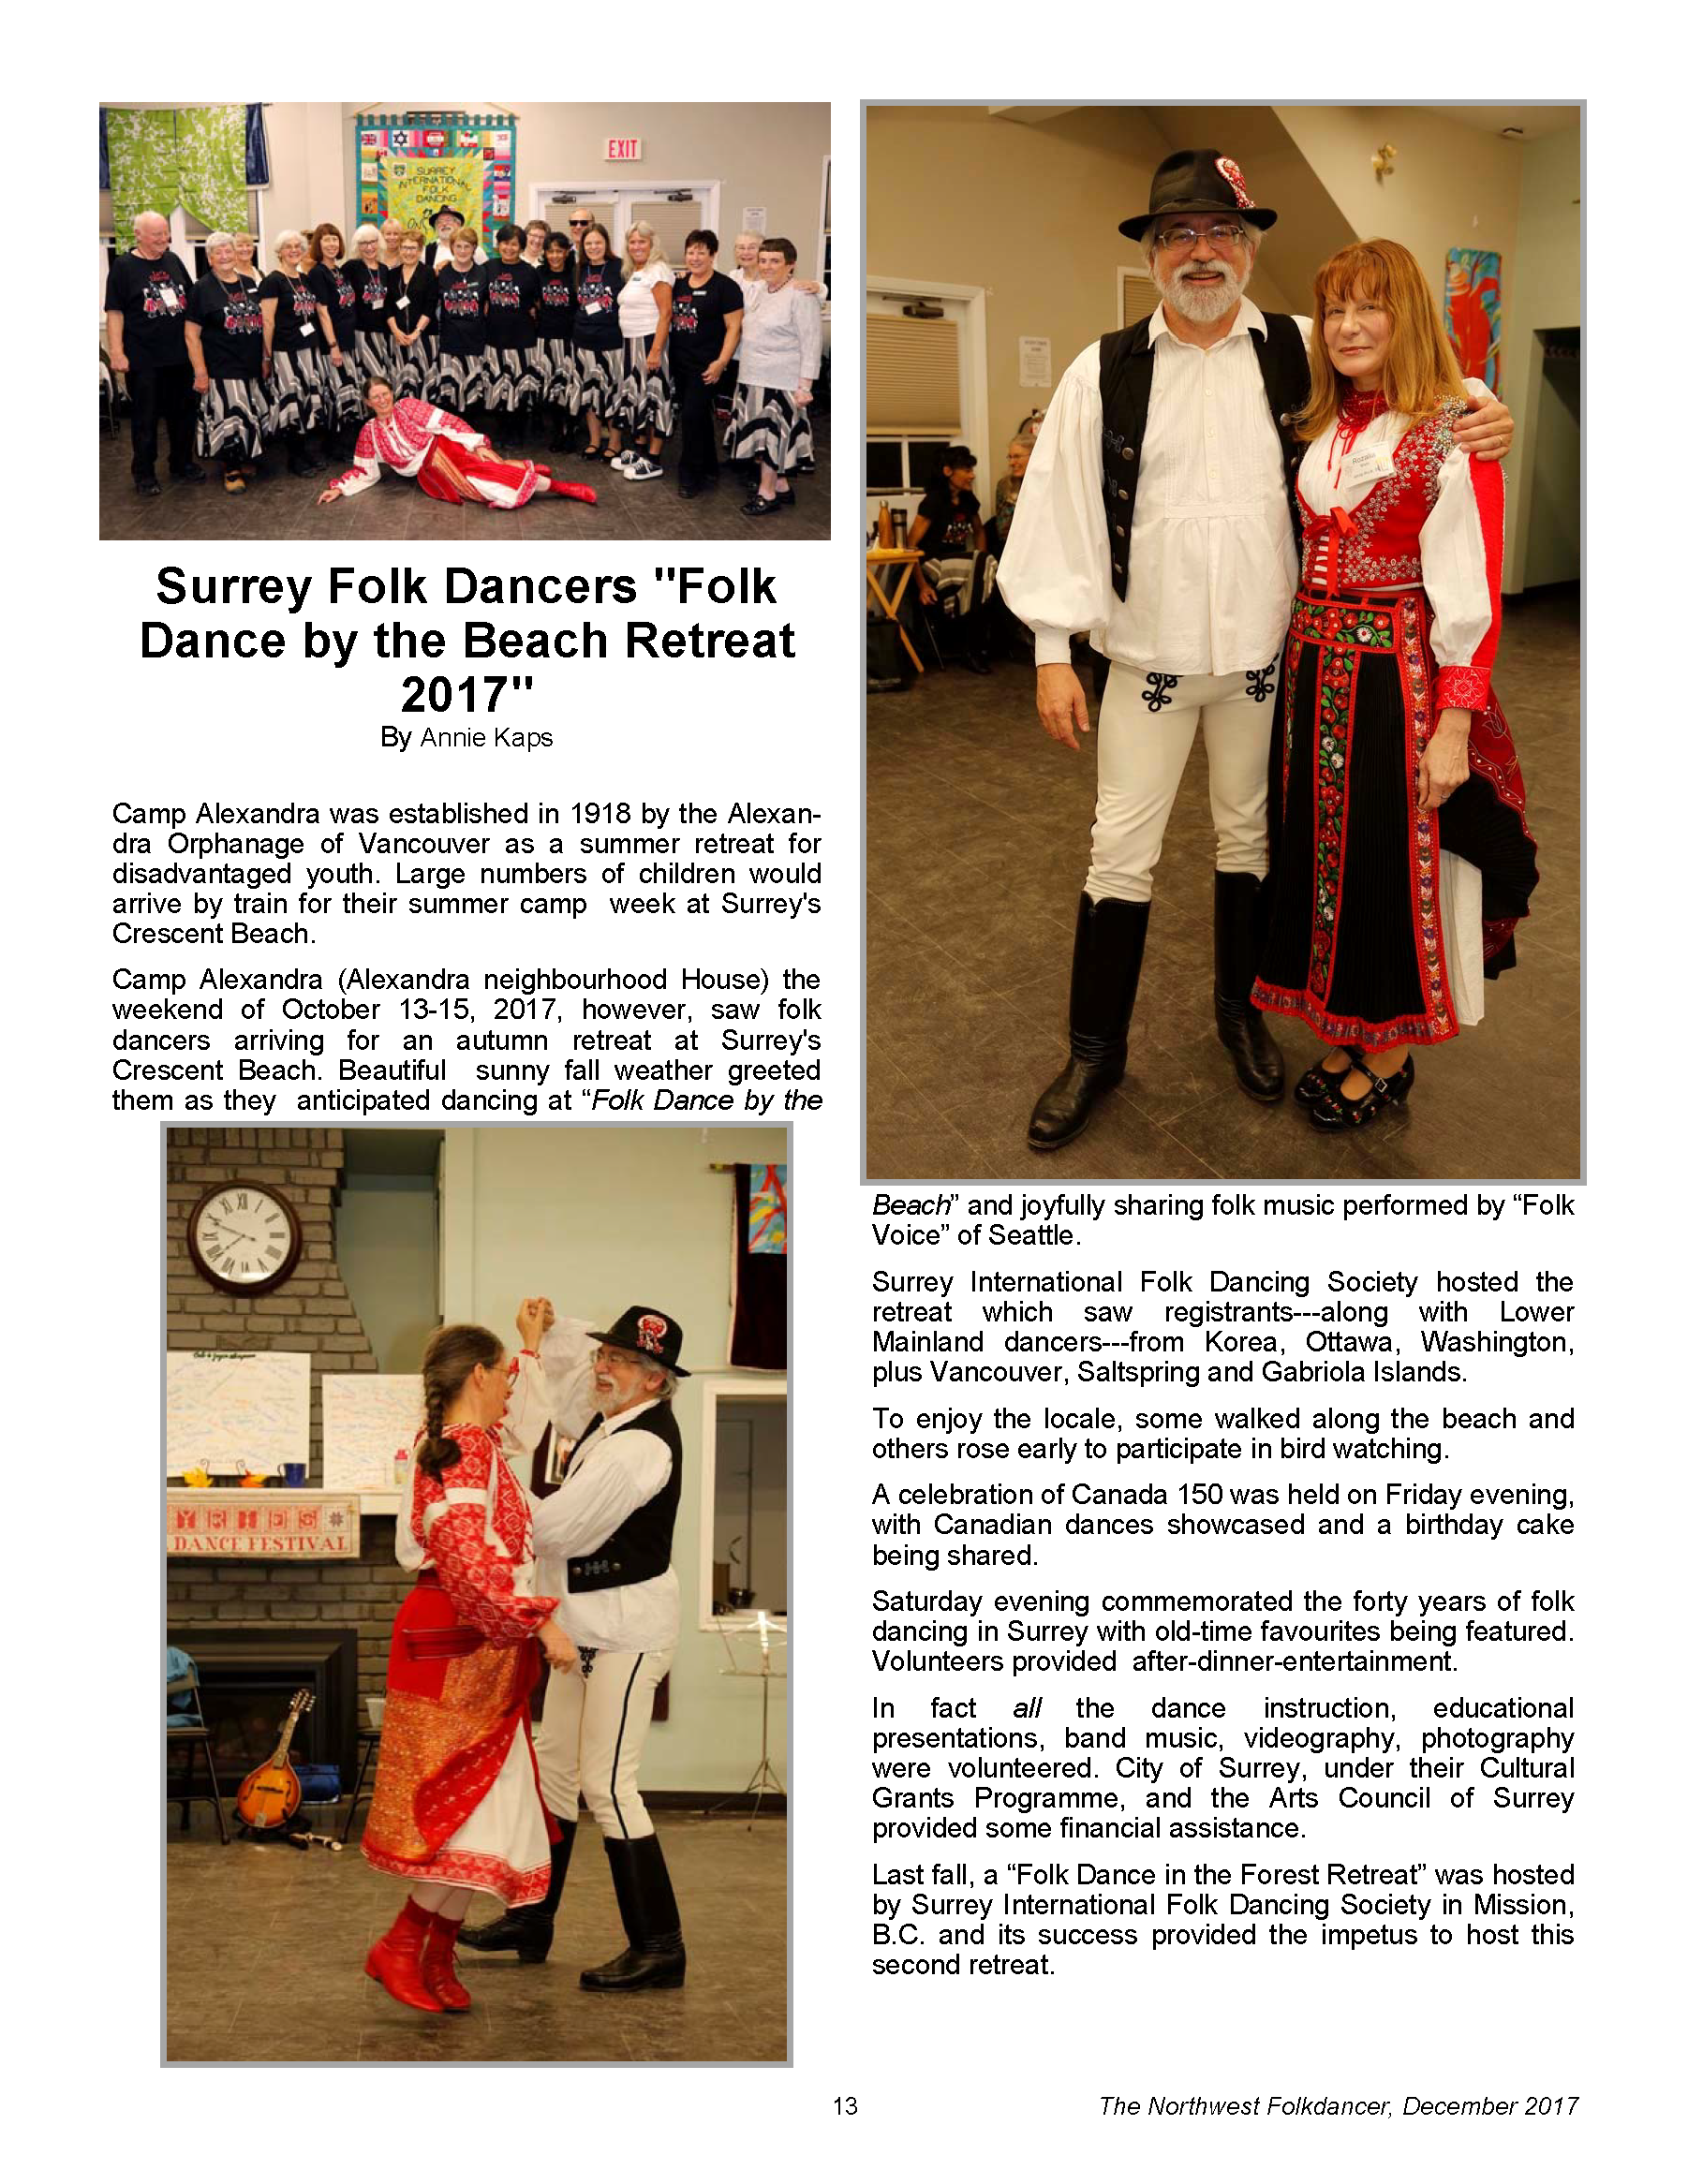 Beach Retreat article Page from Northwest Folkdancer December 2017 issue